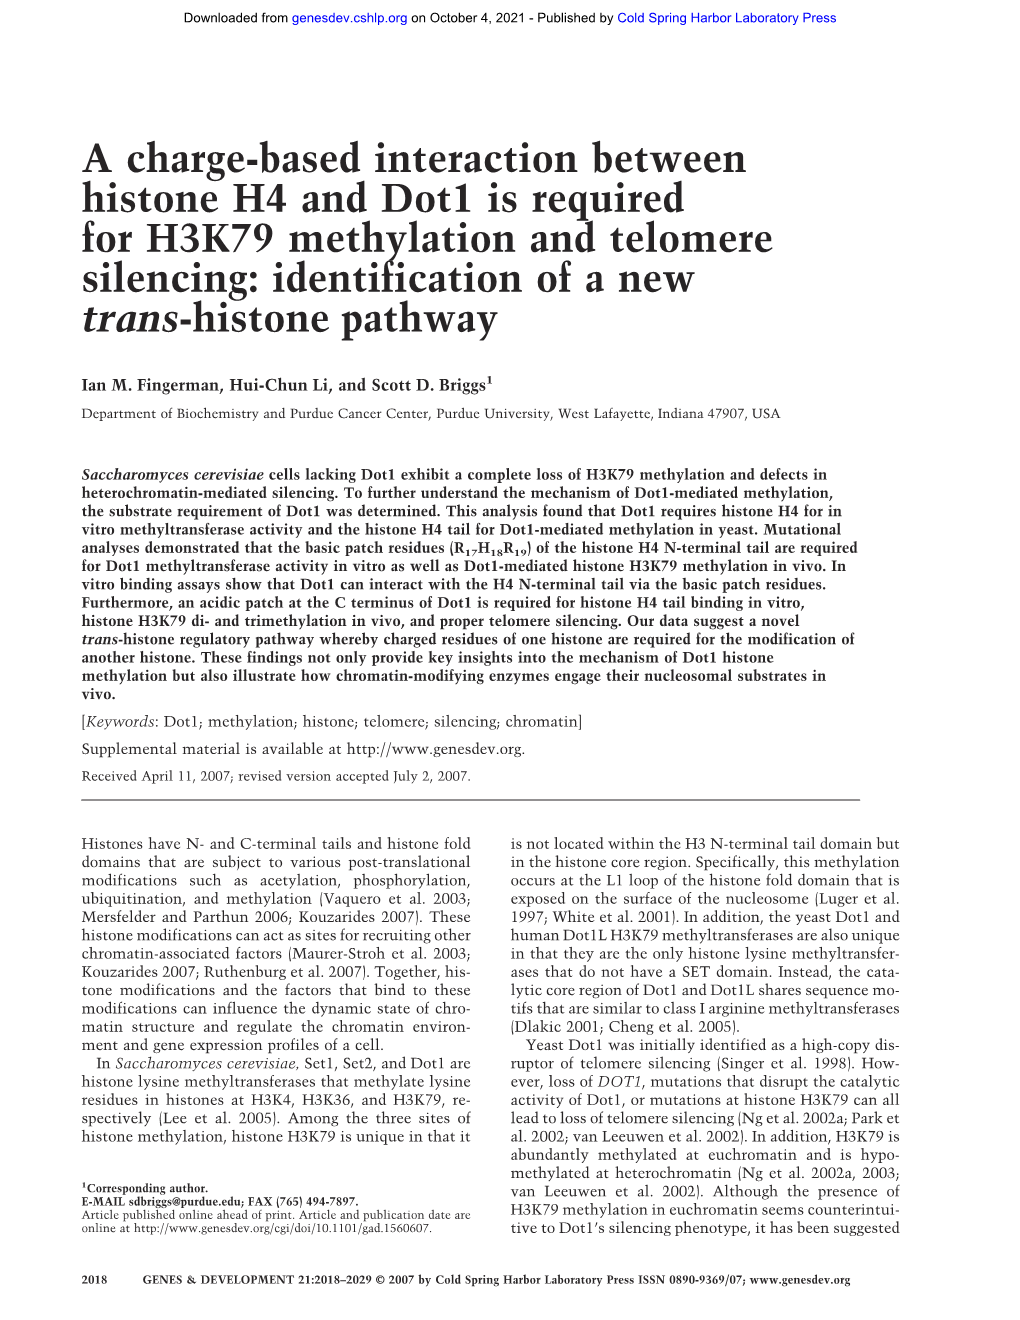 A Charge-Based Interaction Between Histone H4 and Dot1 Is Required for H3K79 Methylation and Telomere Silencing: Identification of a New Trans-Histone Pathway